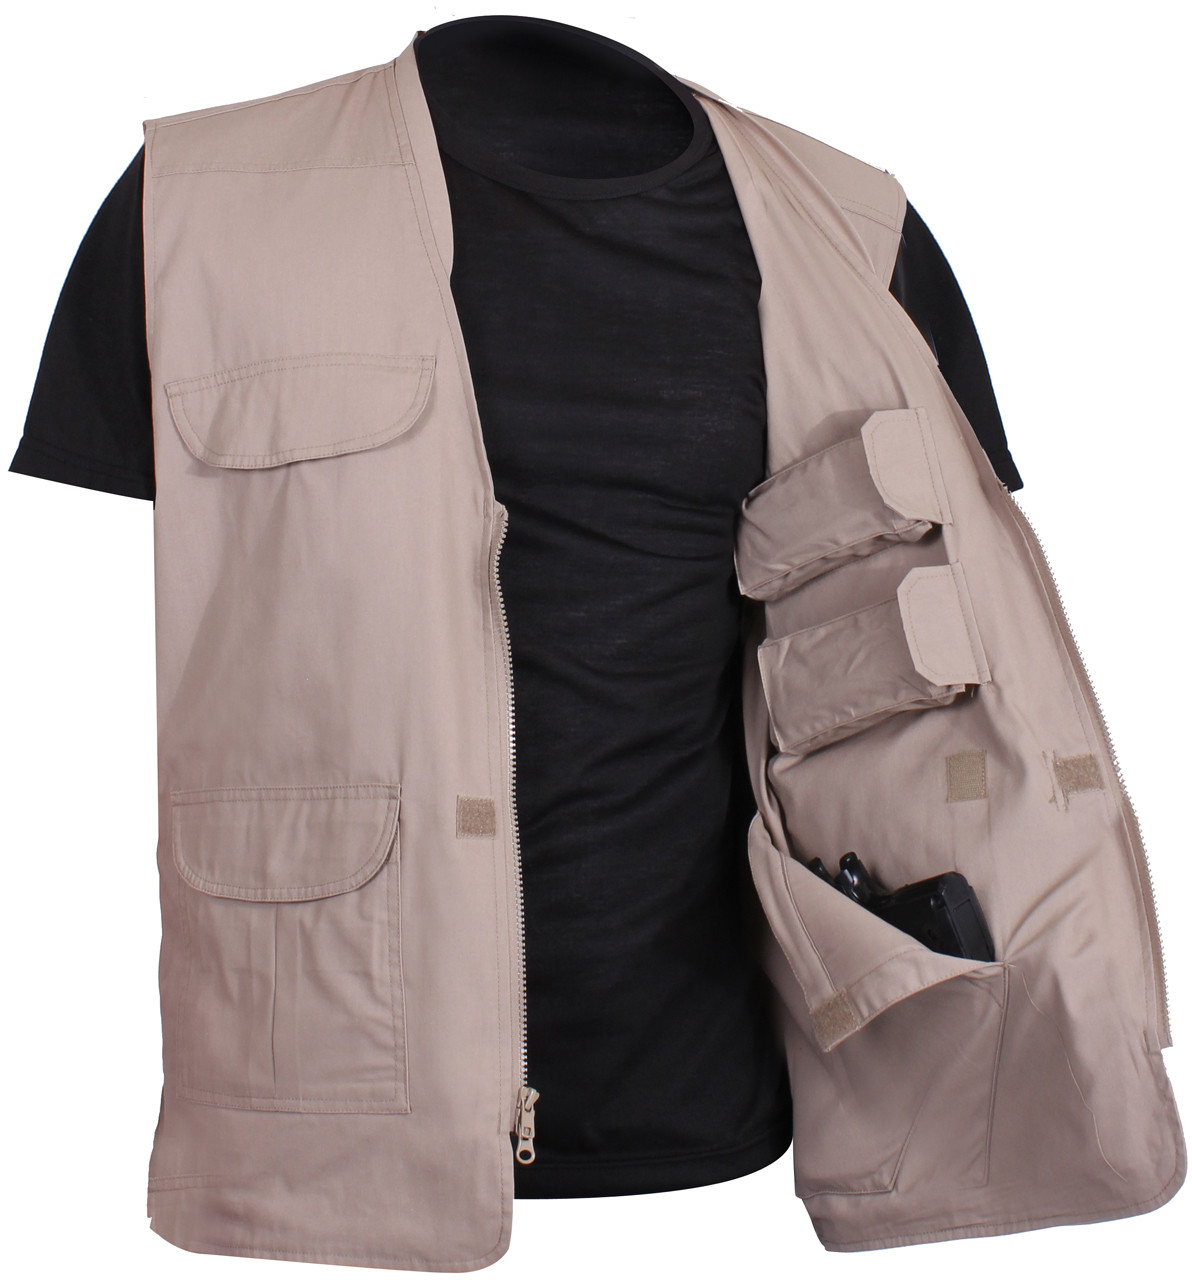 Rothco Plainclothes Concealed Carry Vest20 Models